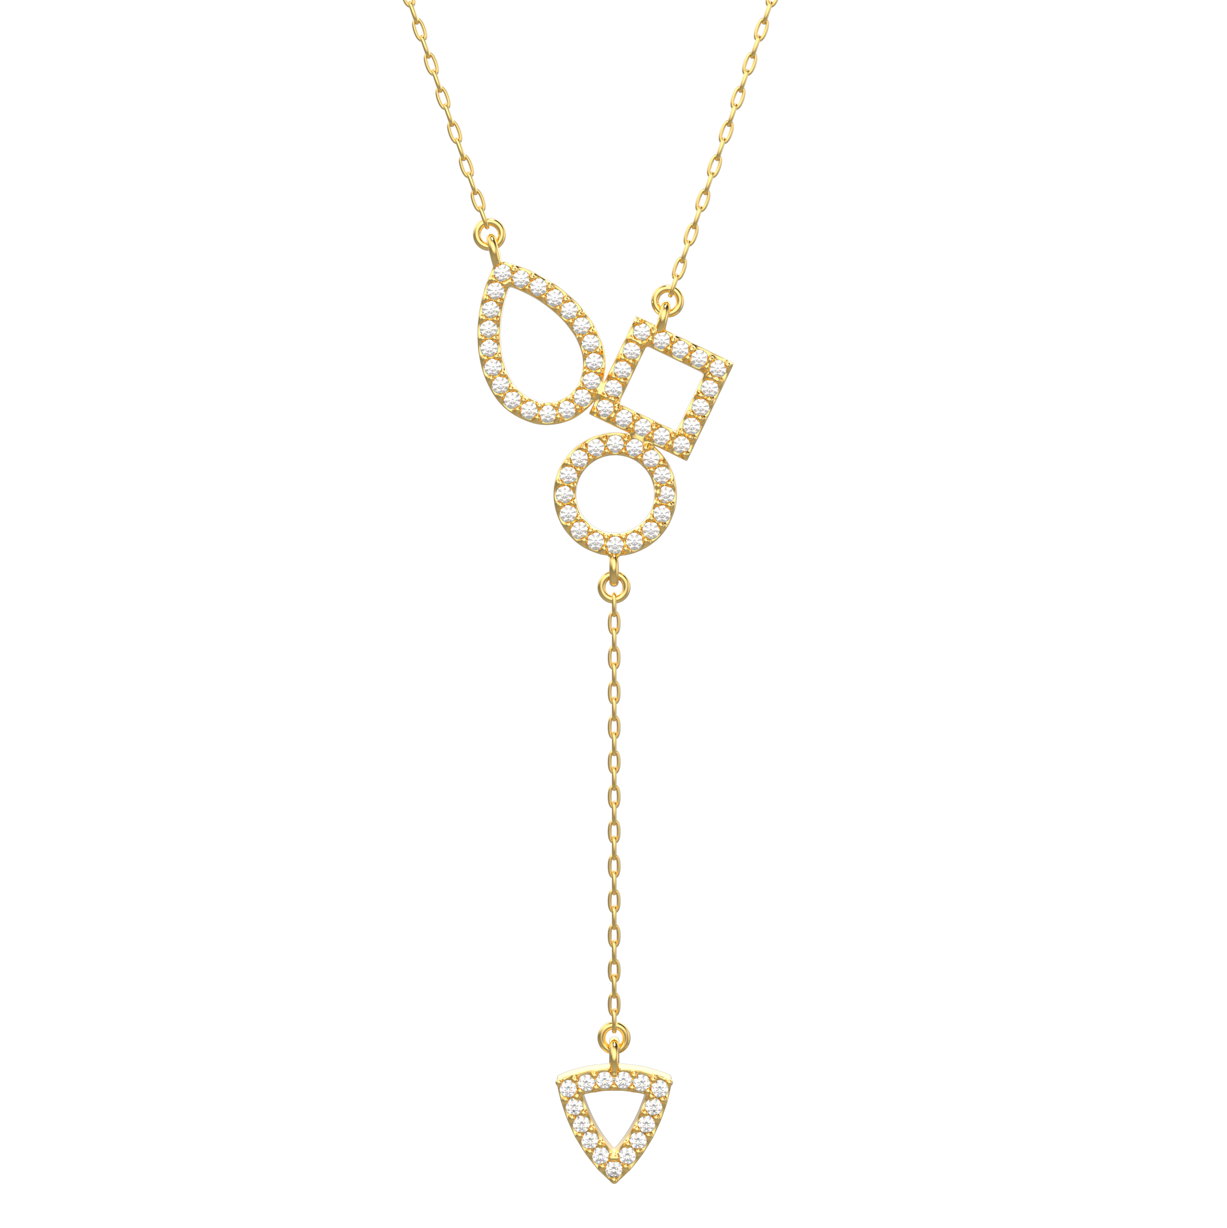 Dangling diamond necklace in 18k Yellow gold - SIR1532